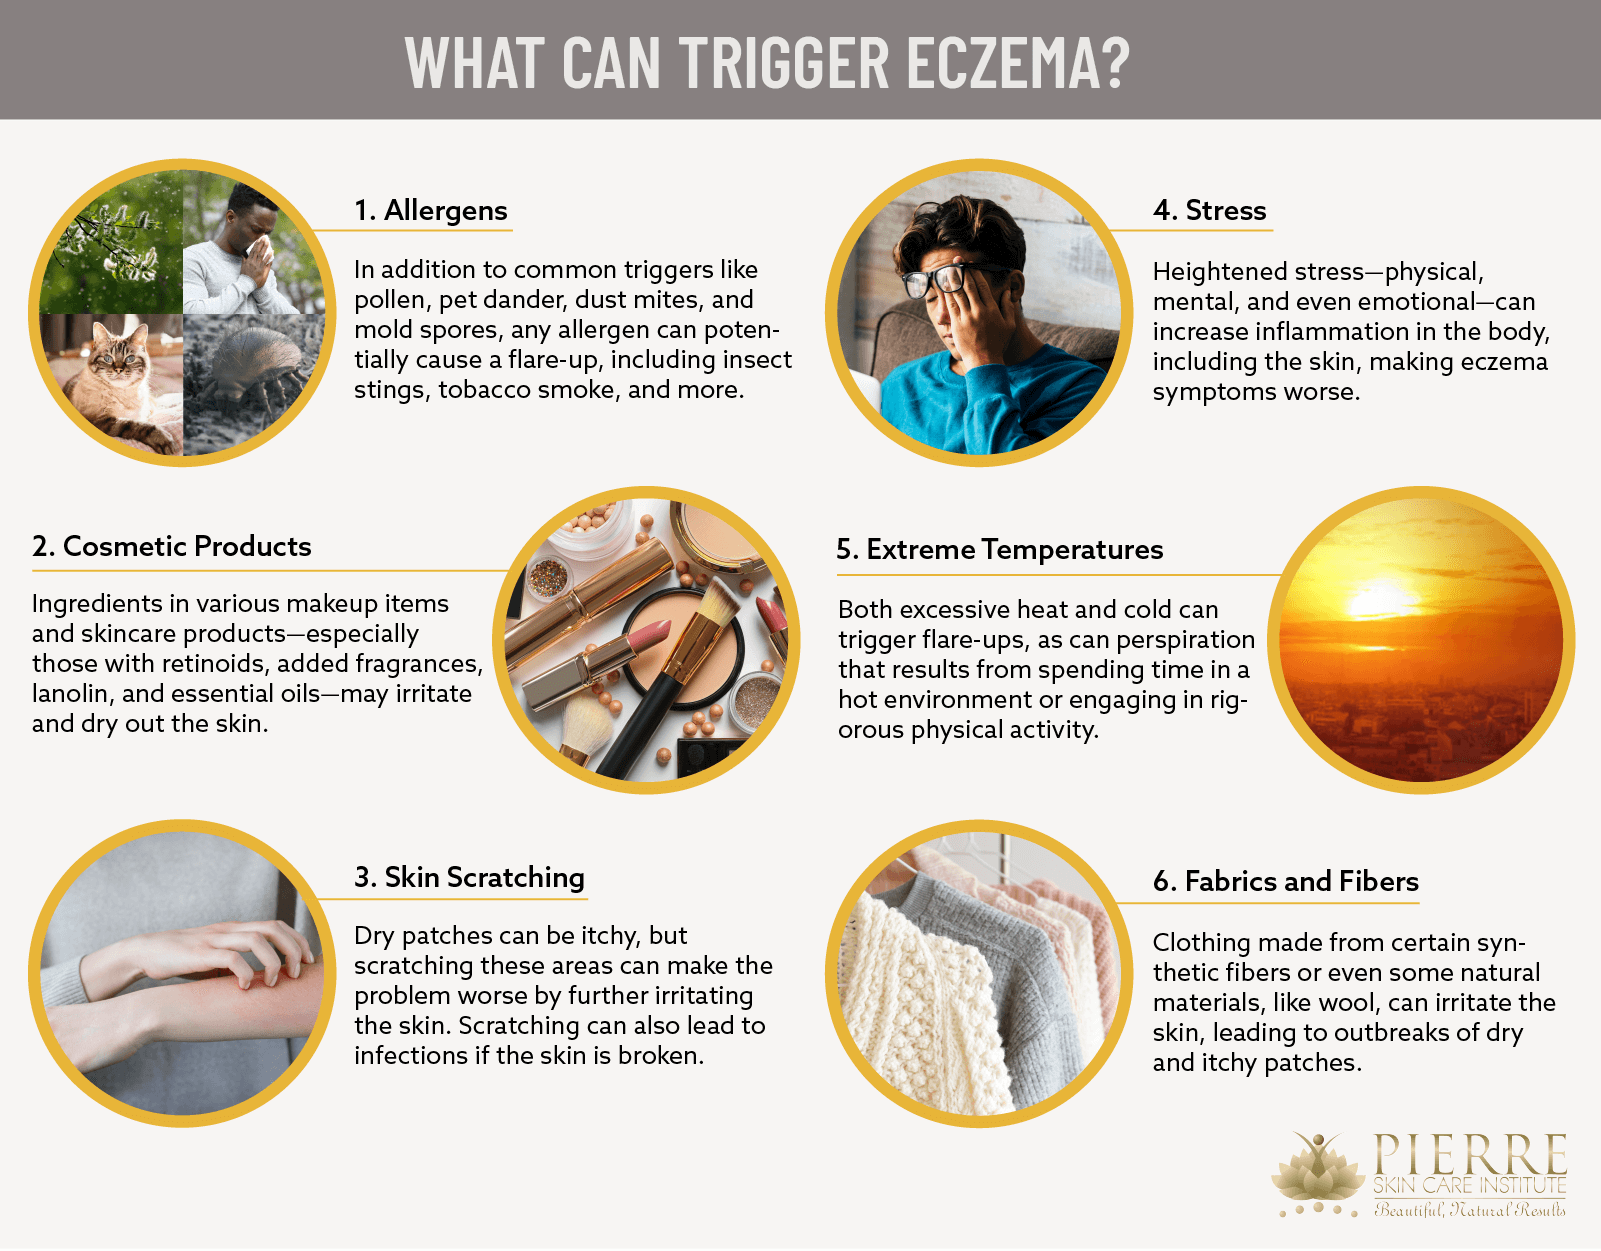 Learn multiple possible eczema triggers from Thousand Oaks’ Dr. Peterson Pierre.